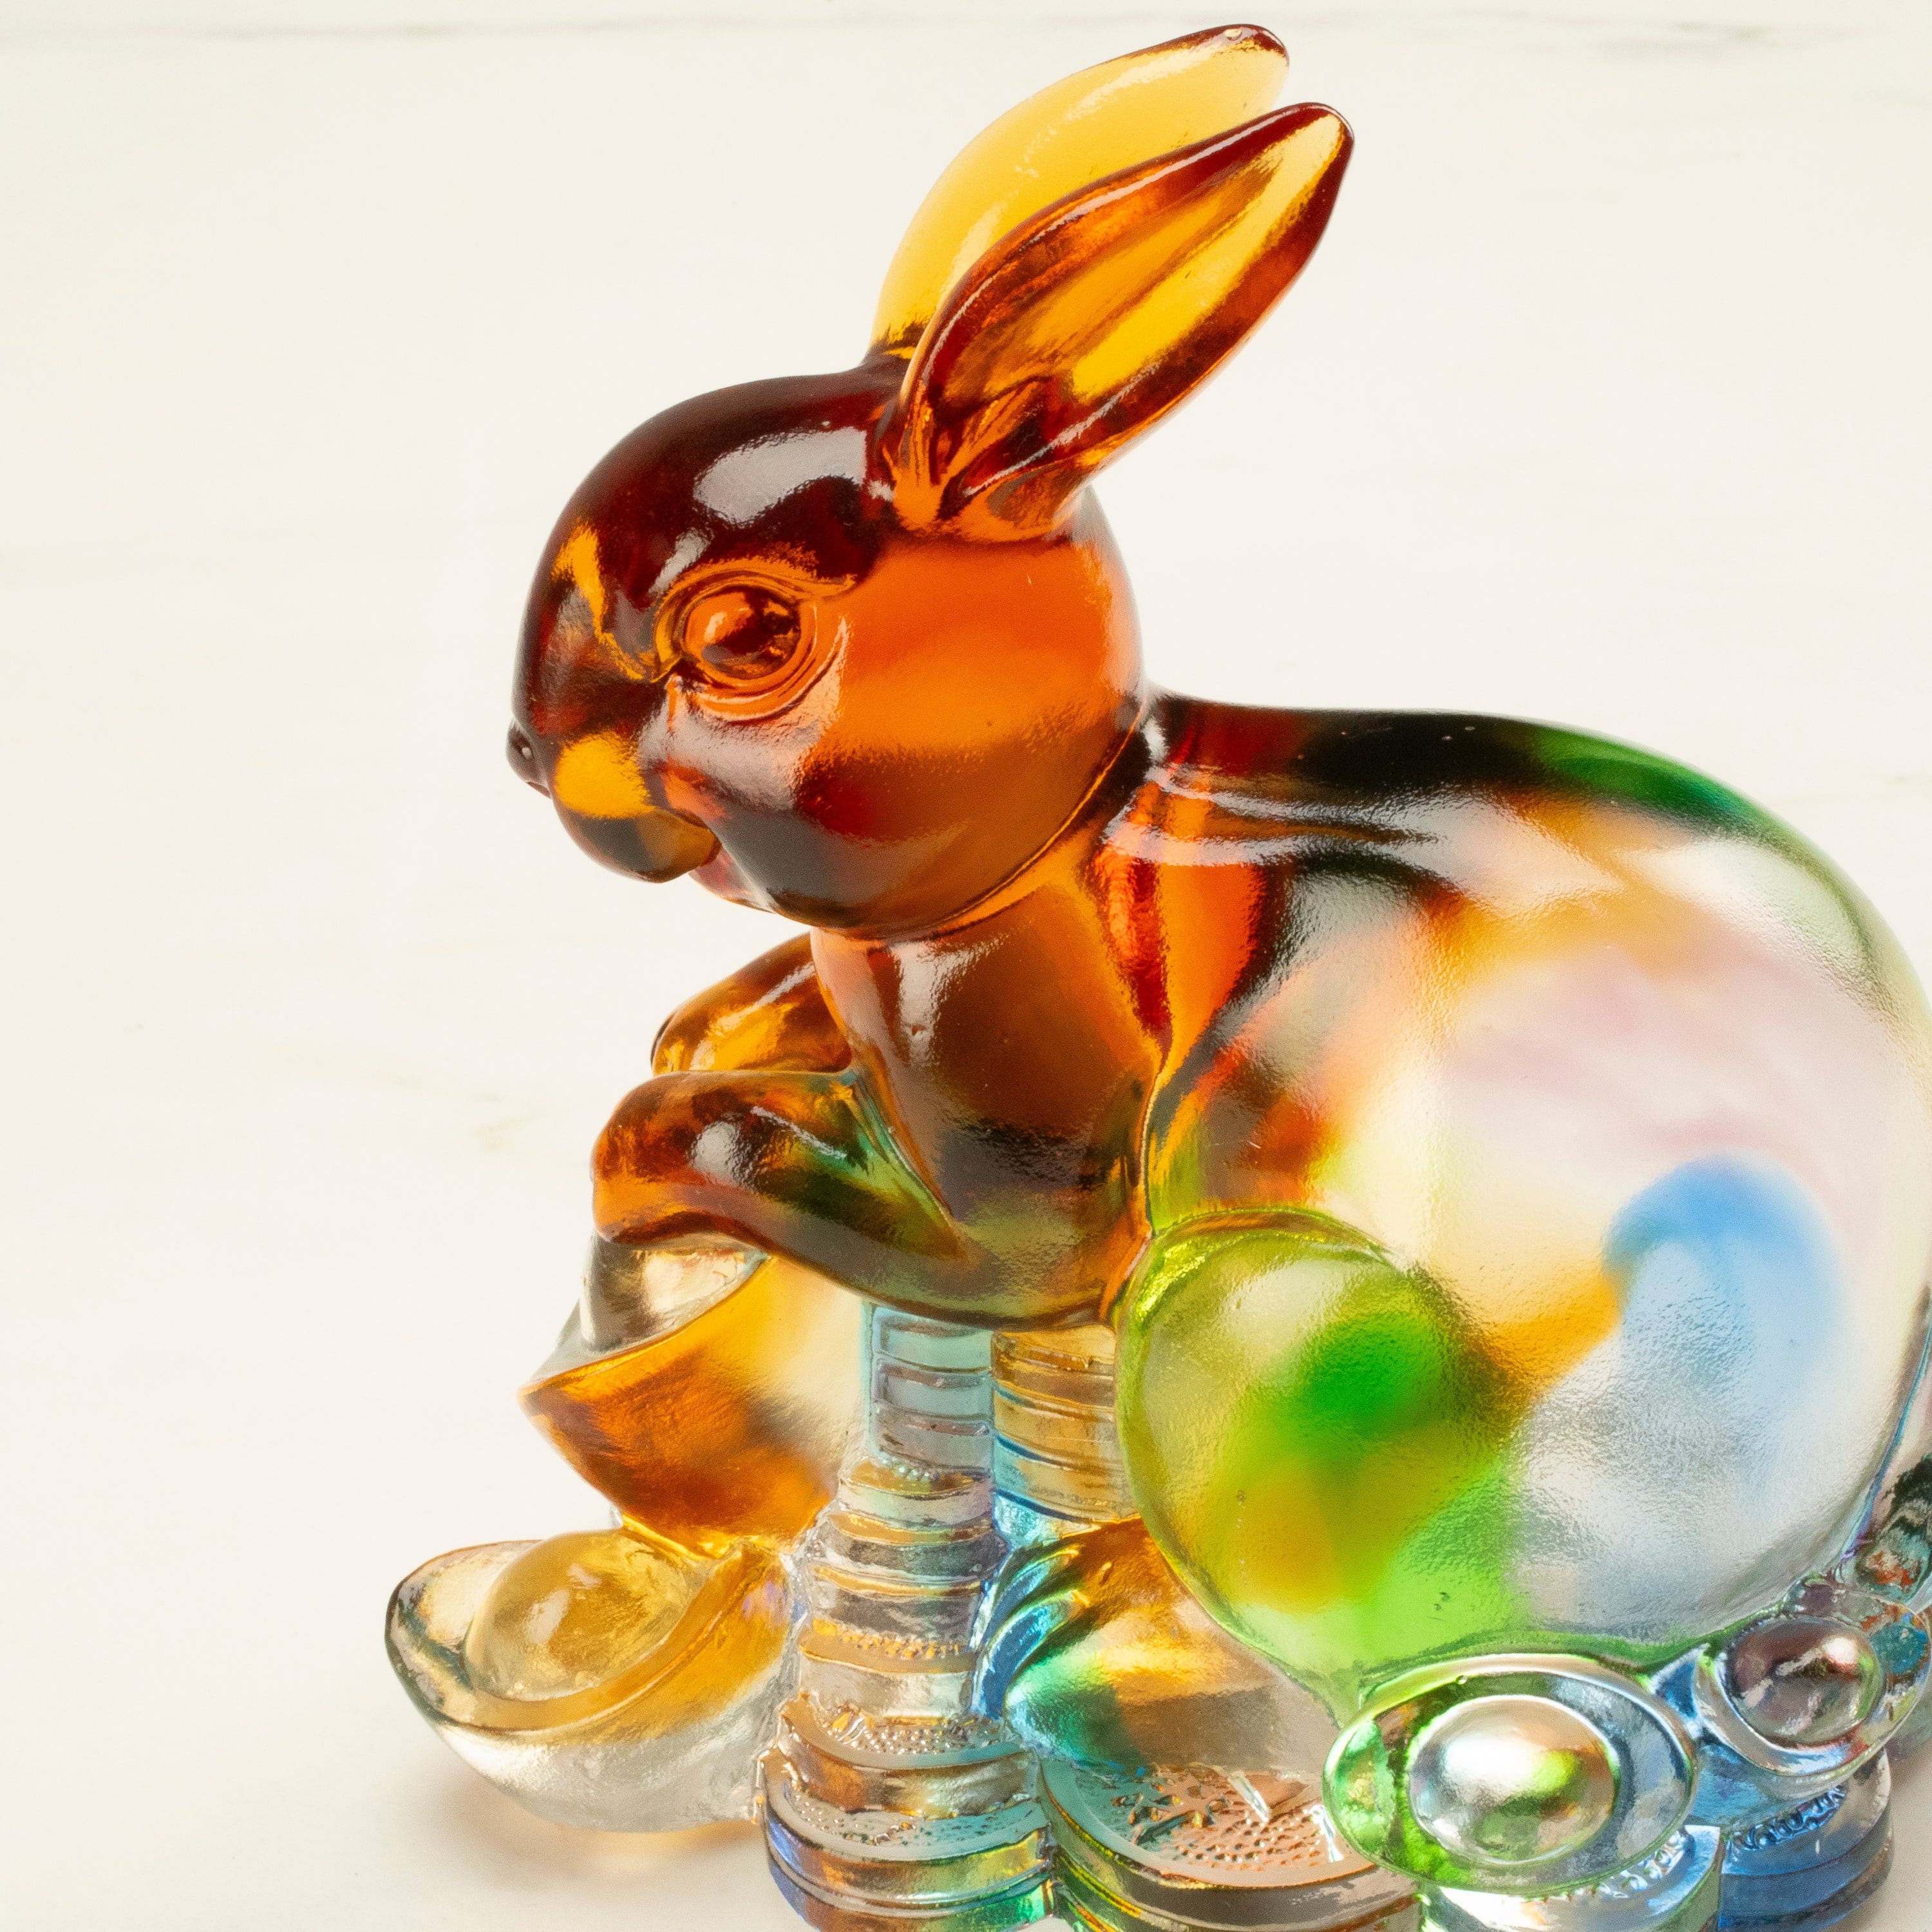 Kalifano Crystal Carving Graceful Rabbit Crystal Carving - A Symbol of Good Luck and Prosperity CRZ210-RAB